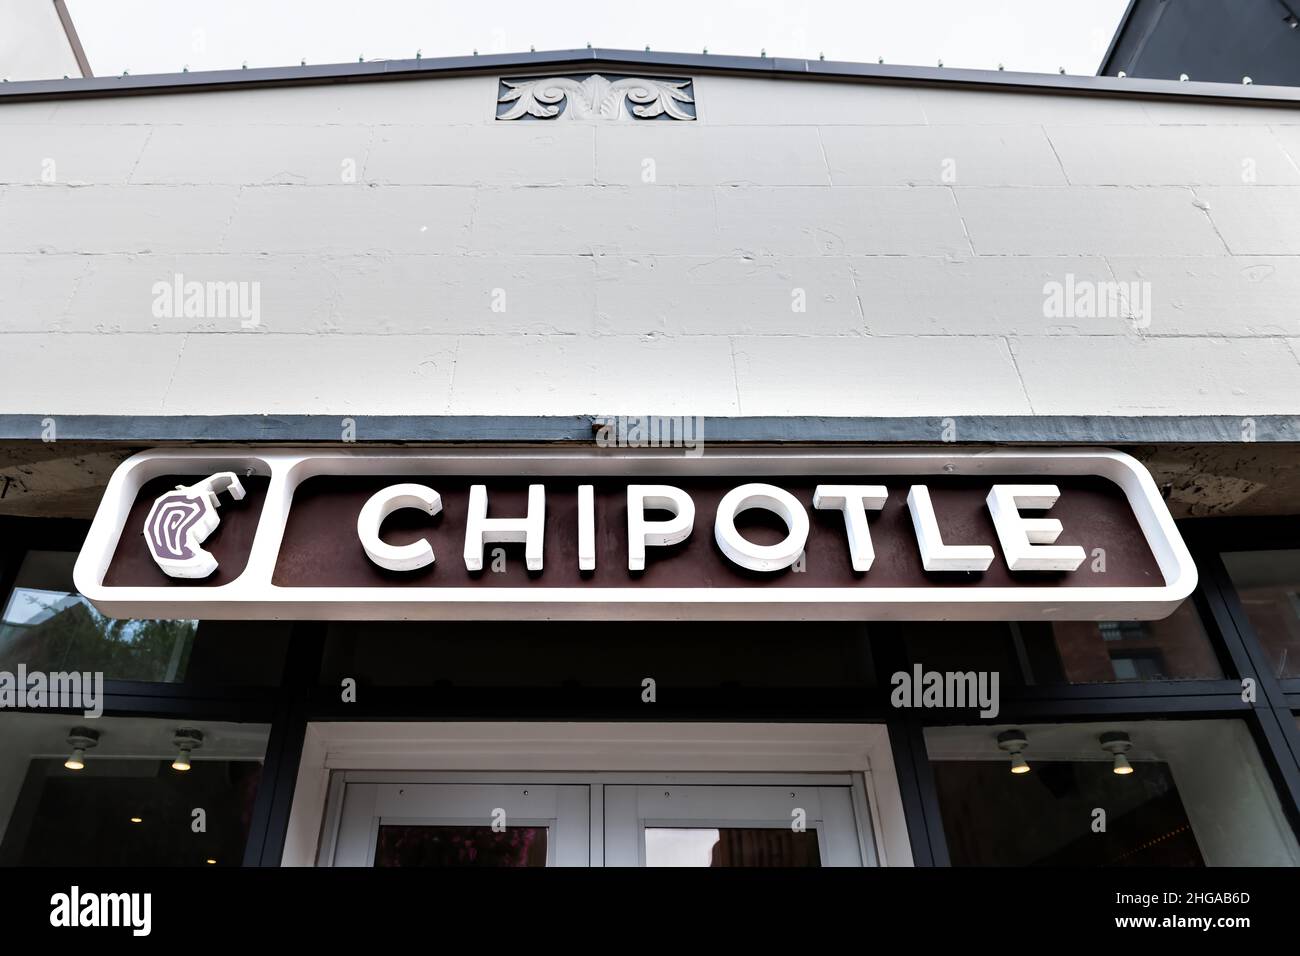 Washington DC, USA - August 18, 2021: Georgetown M street nobody sign closeup for Chipotle Mexican fast food healthy restaurant building exterior serv Stock Photo